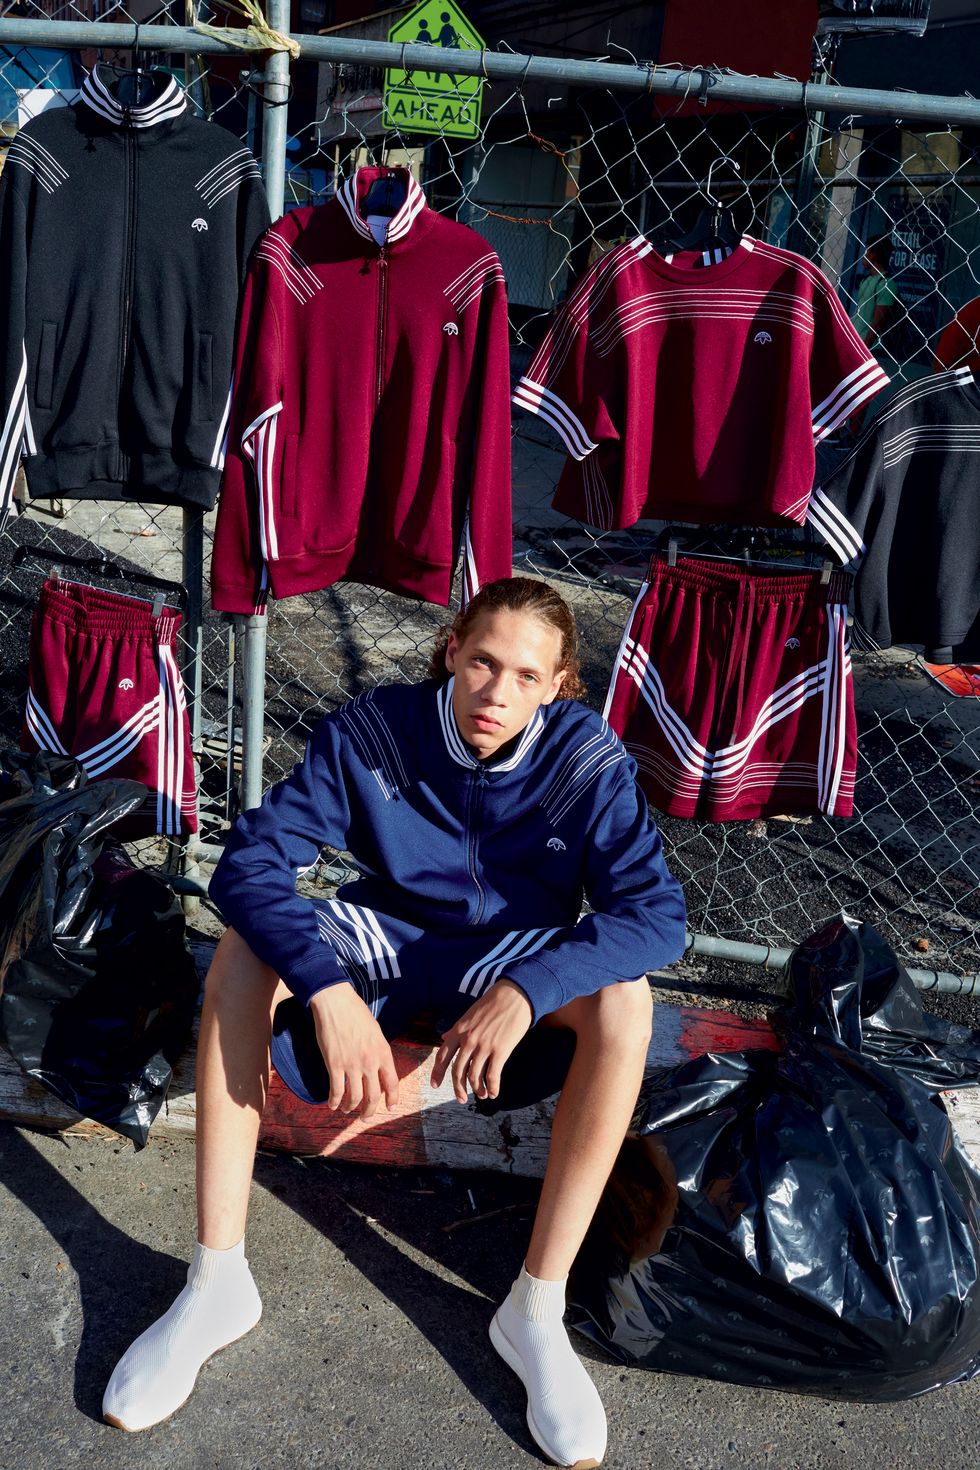 Adidas and Alexander Are Dropping the Vintage-Inspired Gear You'll Wear All Spring